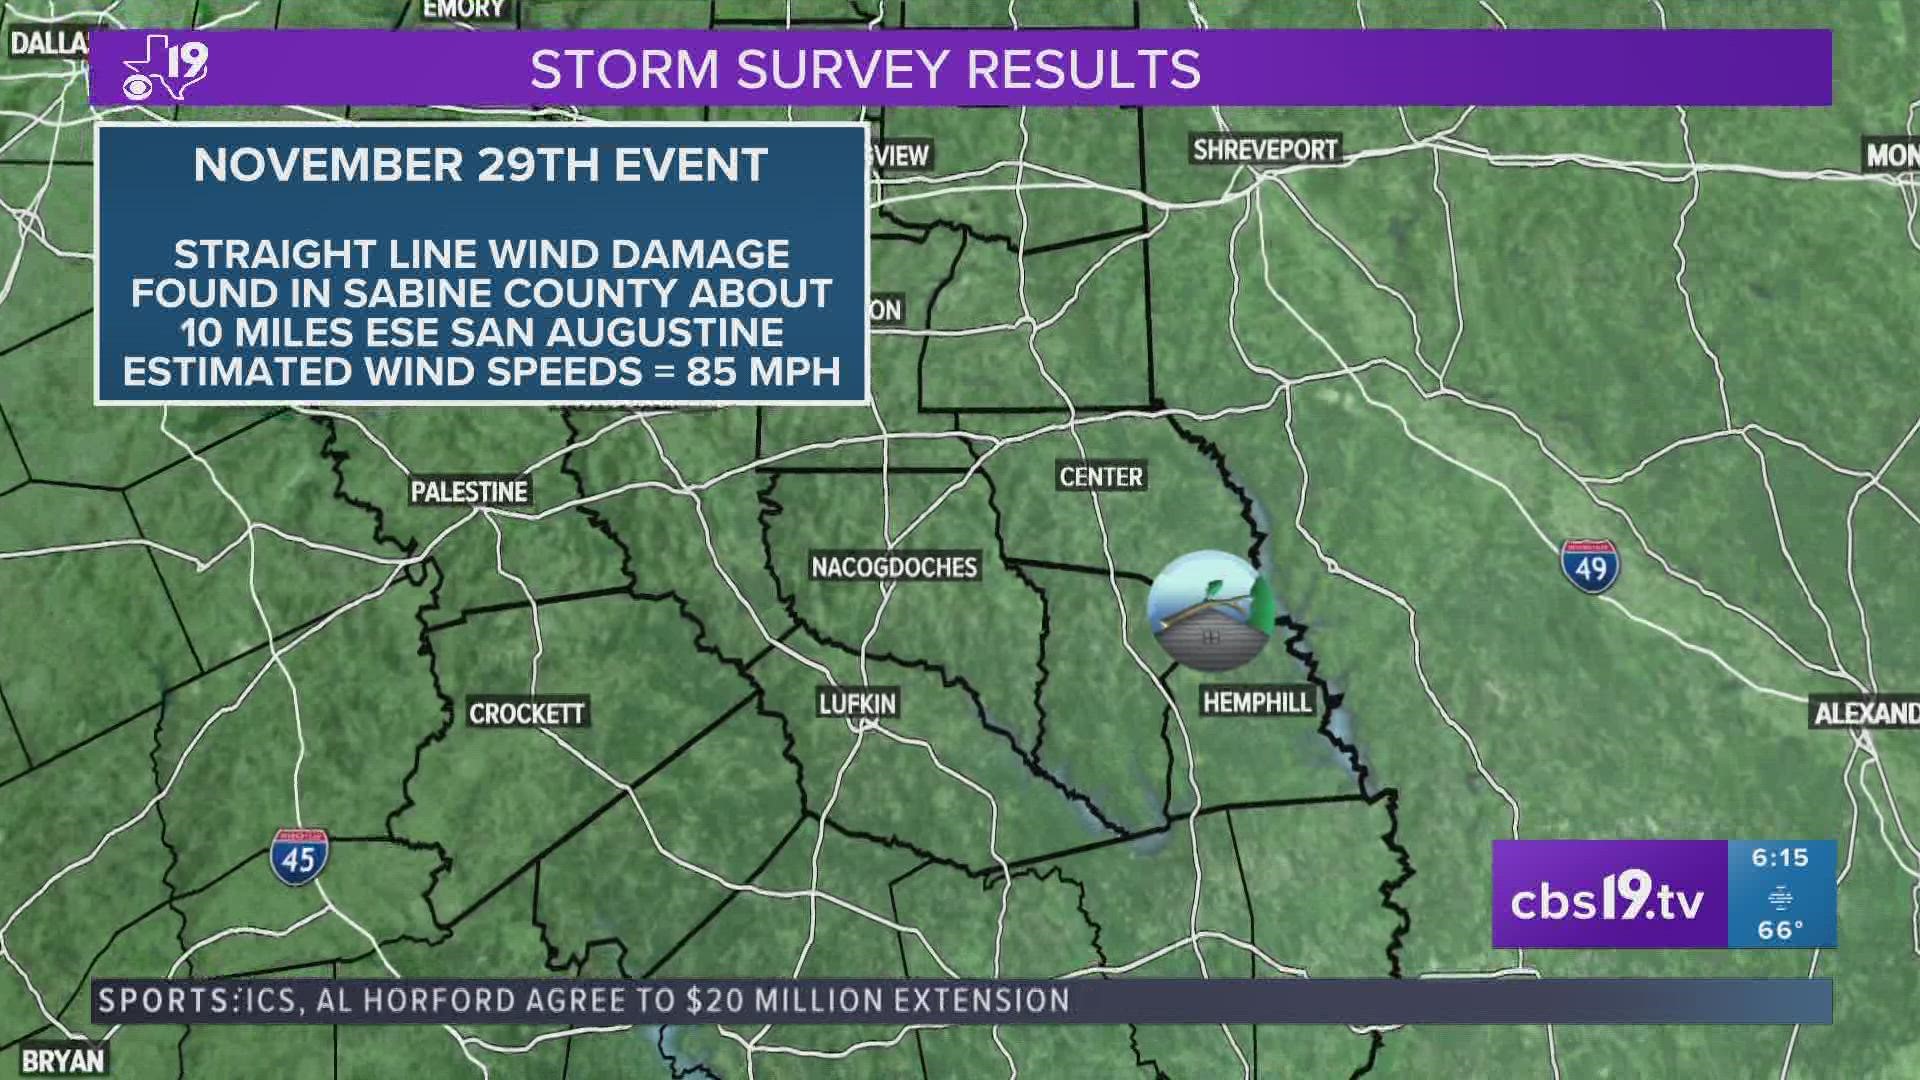 The estimated wind damage found in Sabine County is consistent with straight-line winds of about 85 MPH.